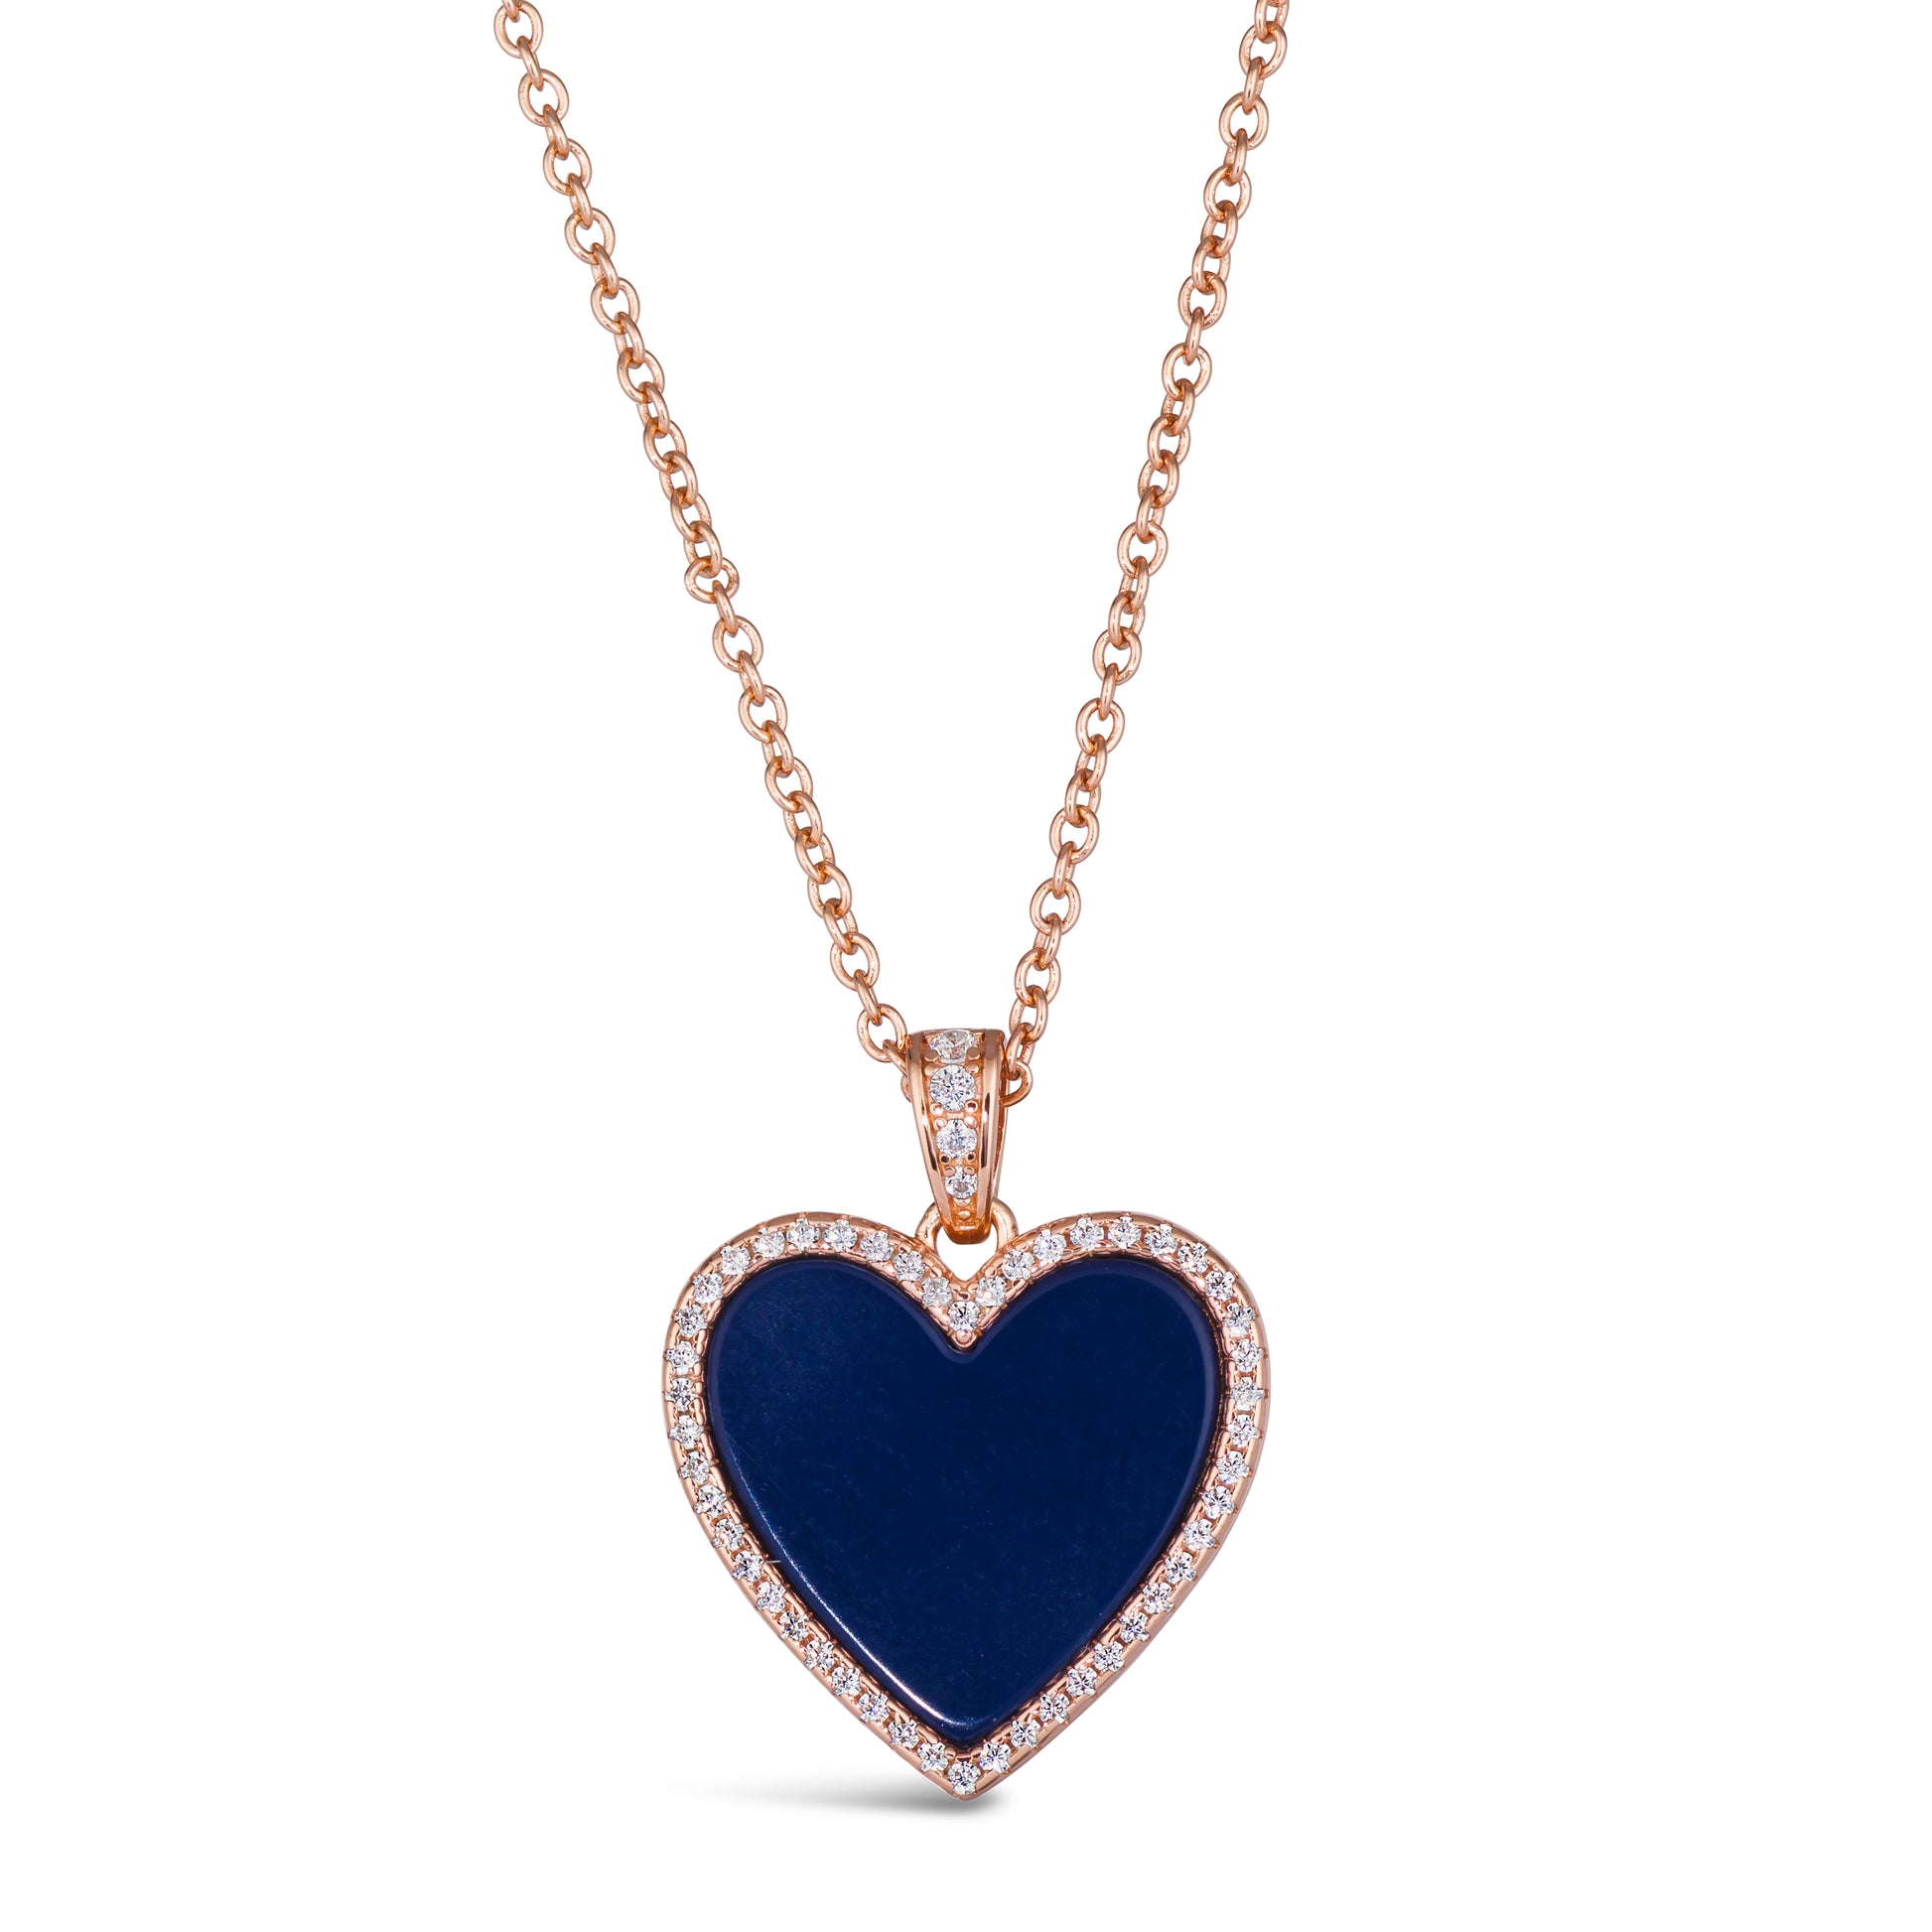 House of Cards 03 Necklace Lapis lazuli Large Heart - Anna Zuckerman Luxury Necklaces